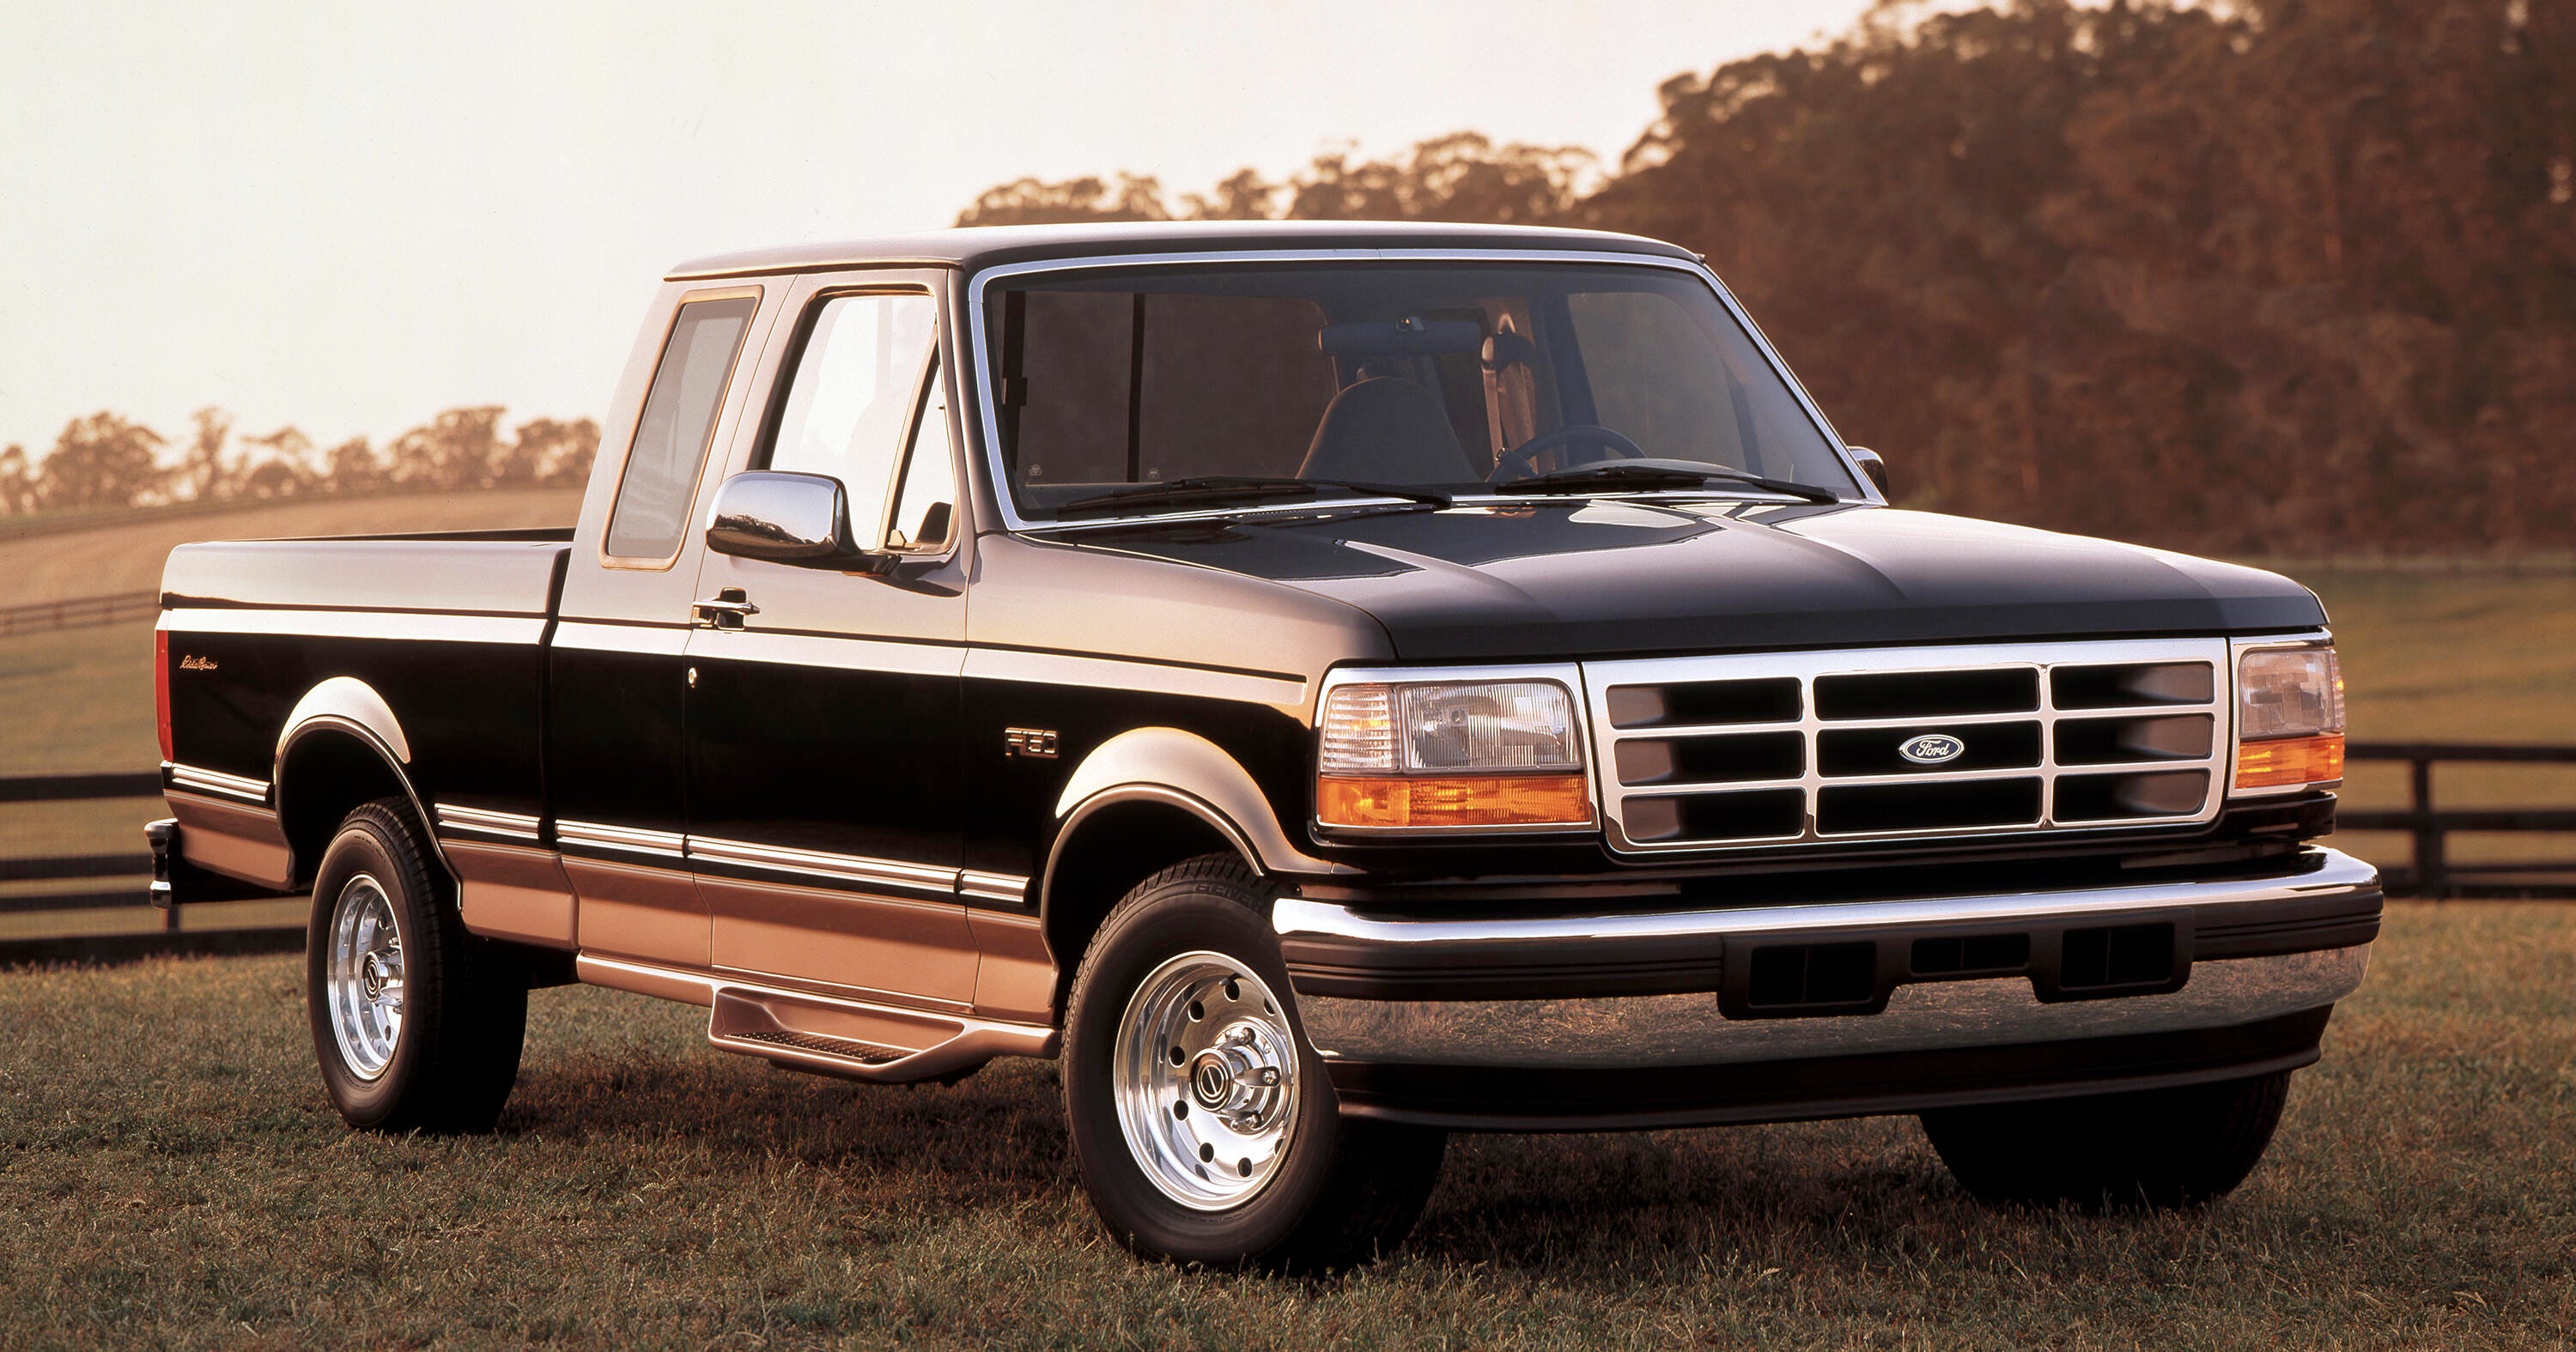 10 best-selling cars, trucks and SUVs of 1995 